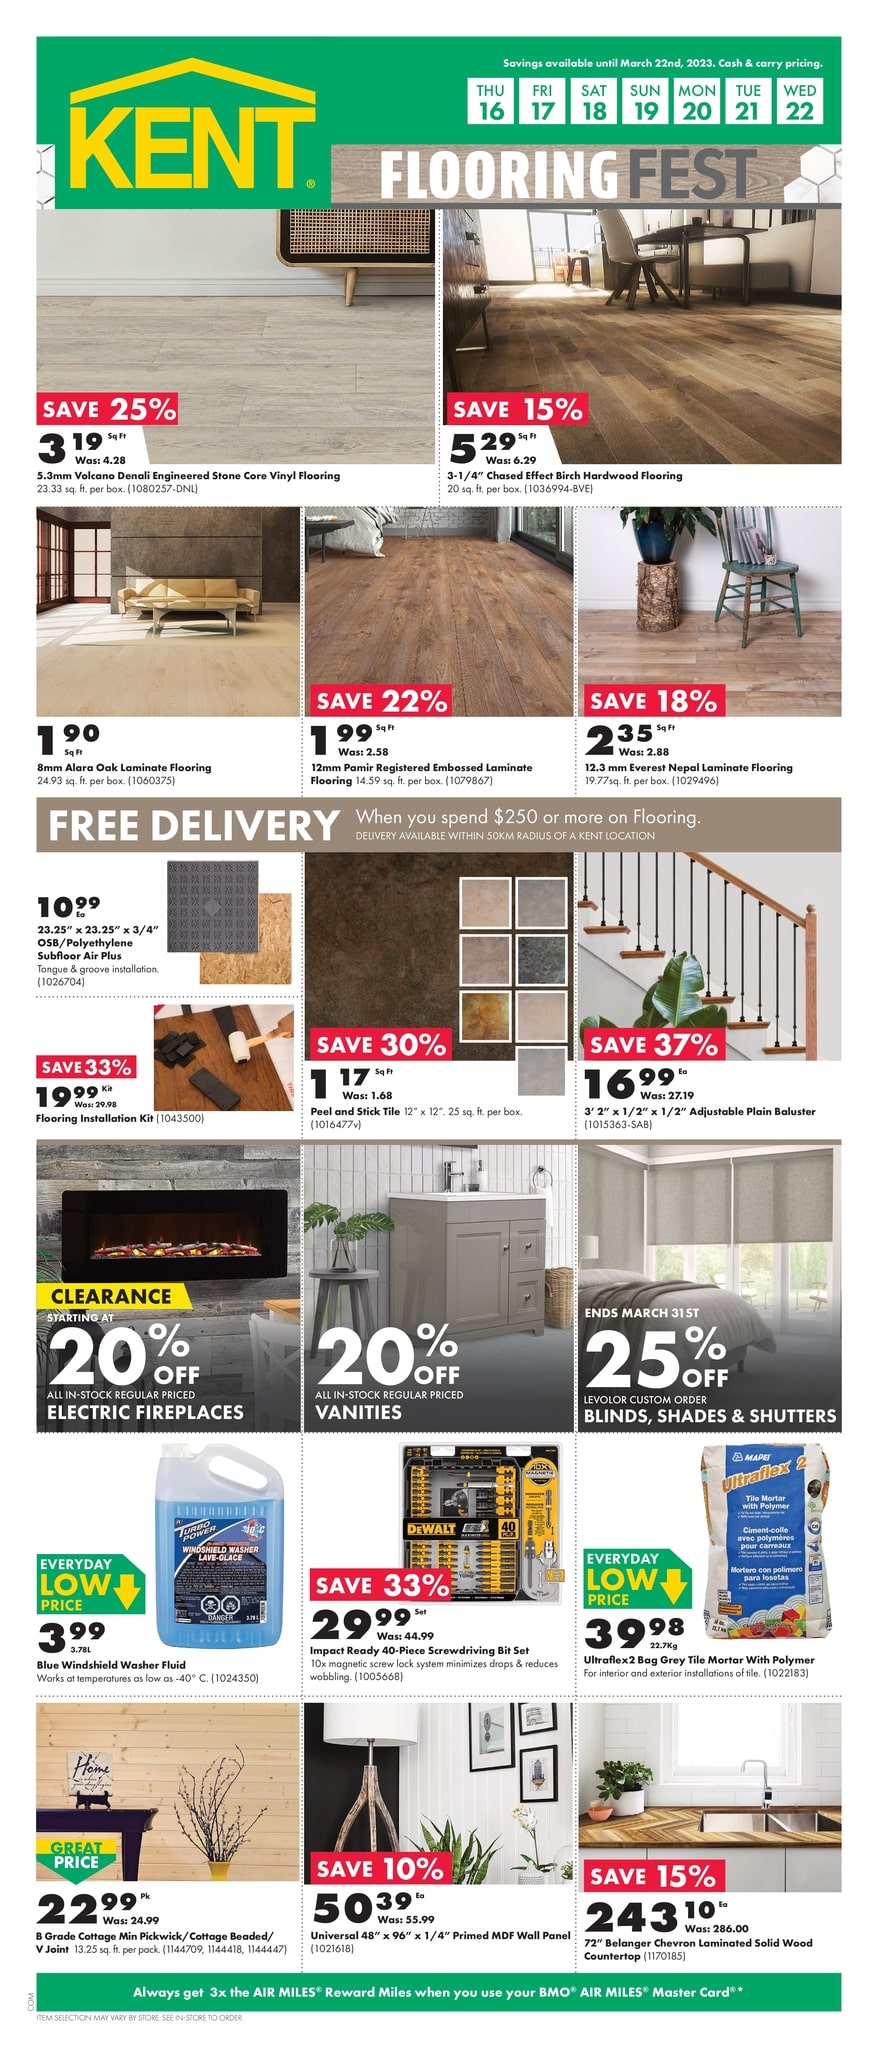 Kent - Weekly Flyer Specials - Page 1